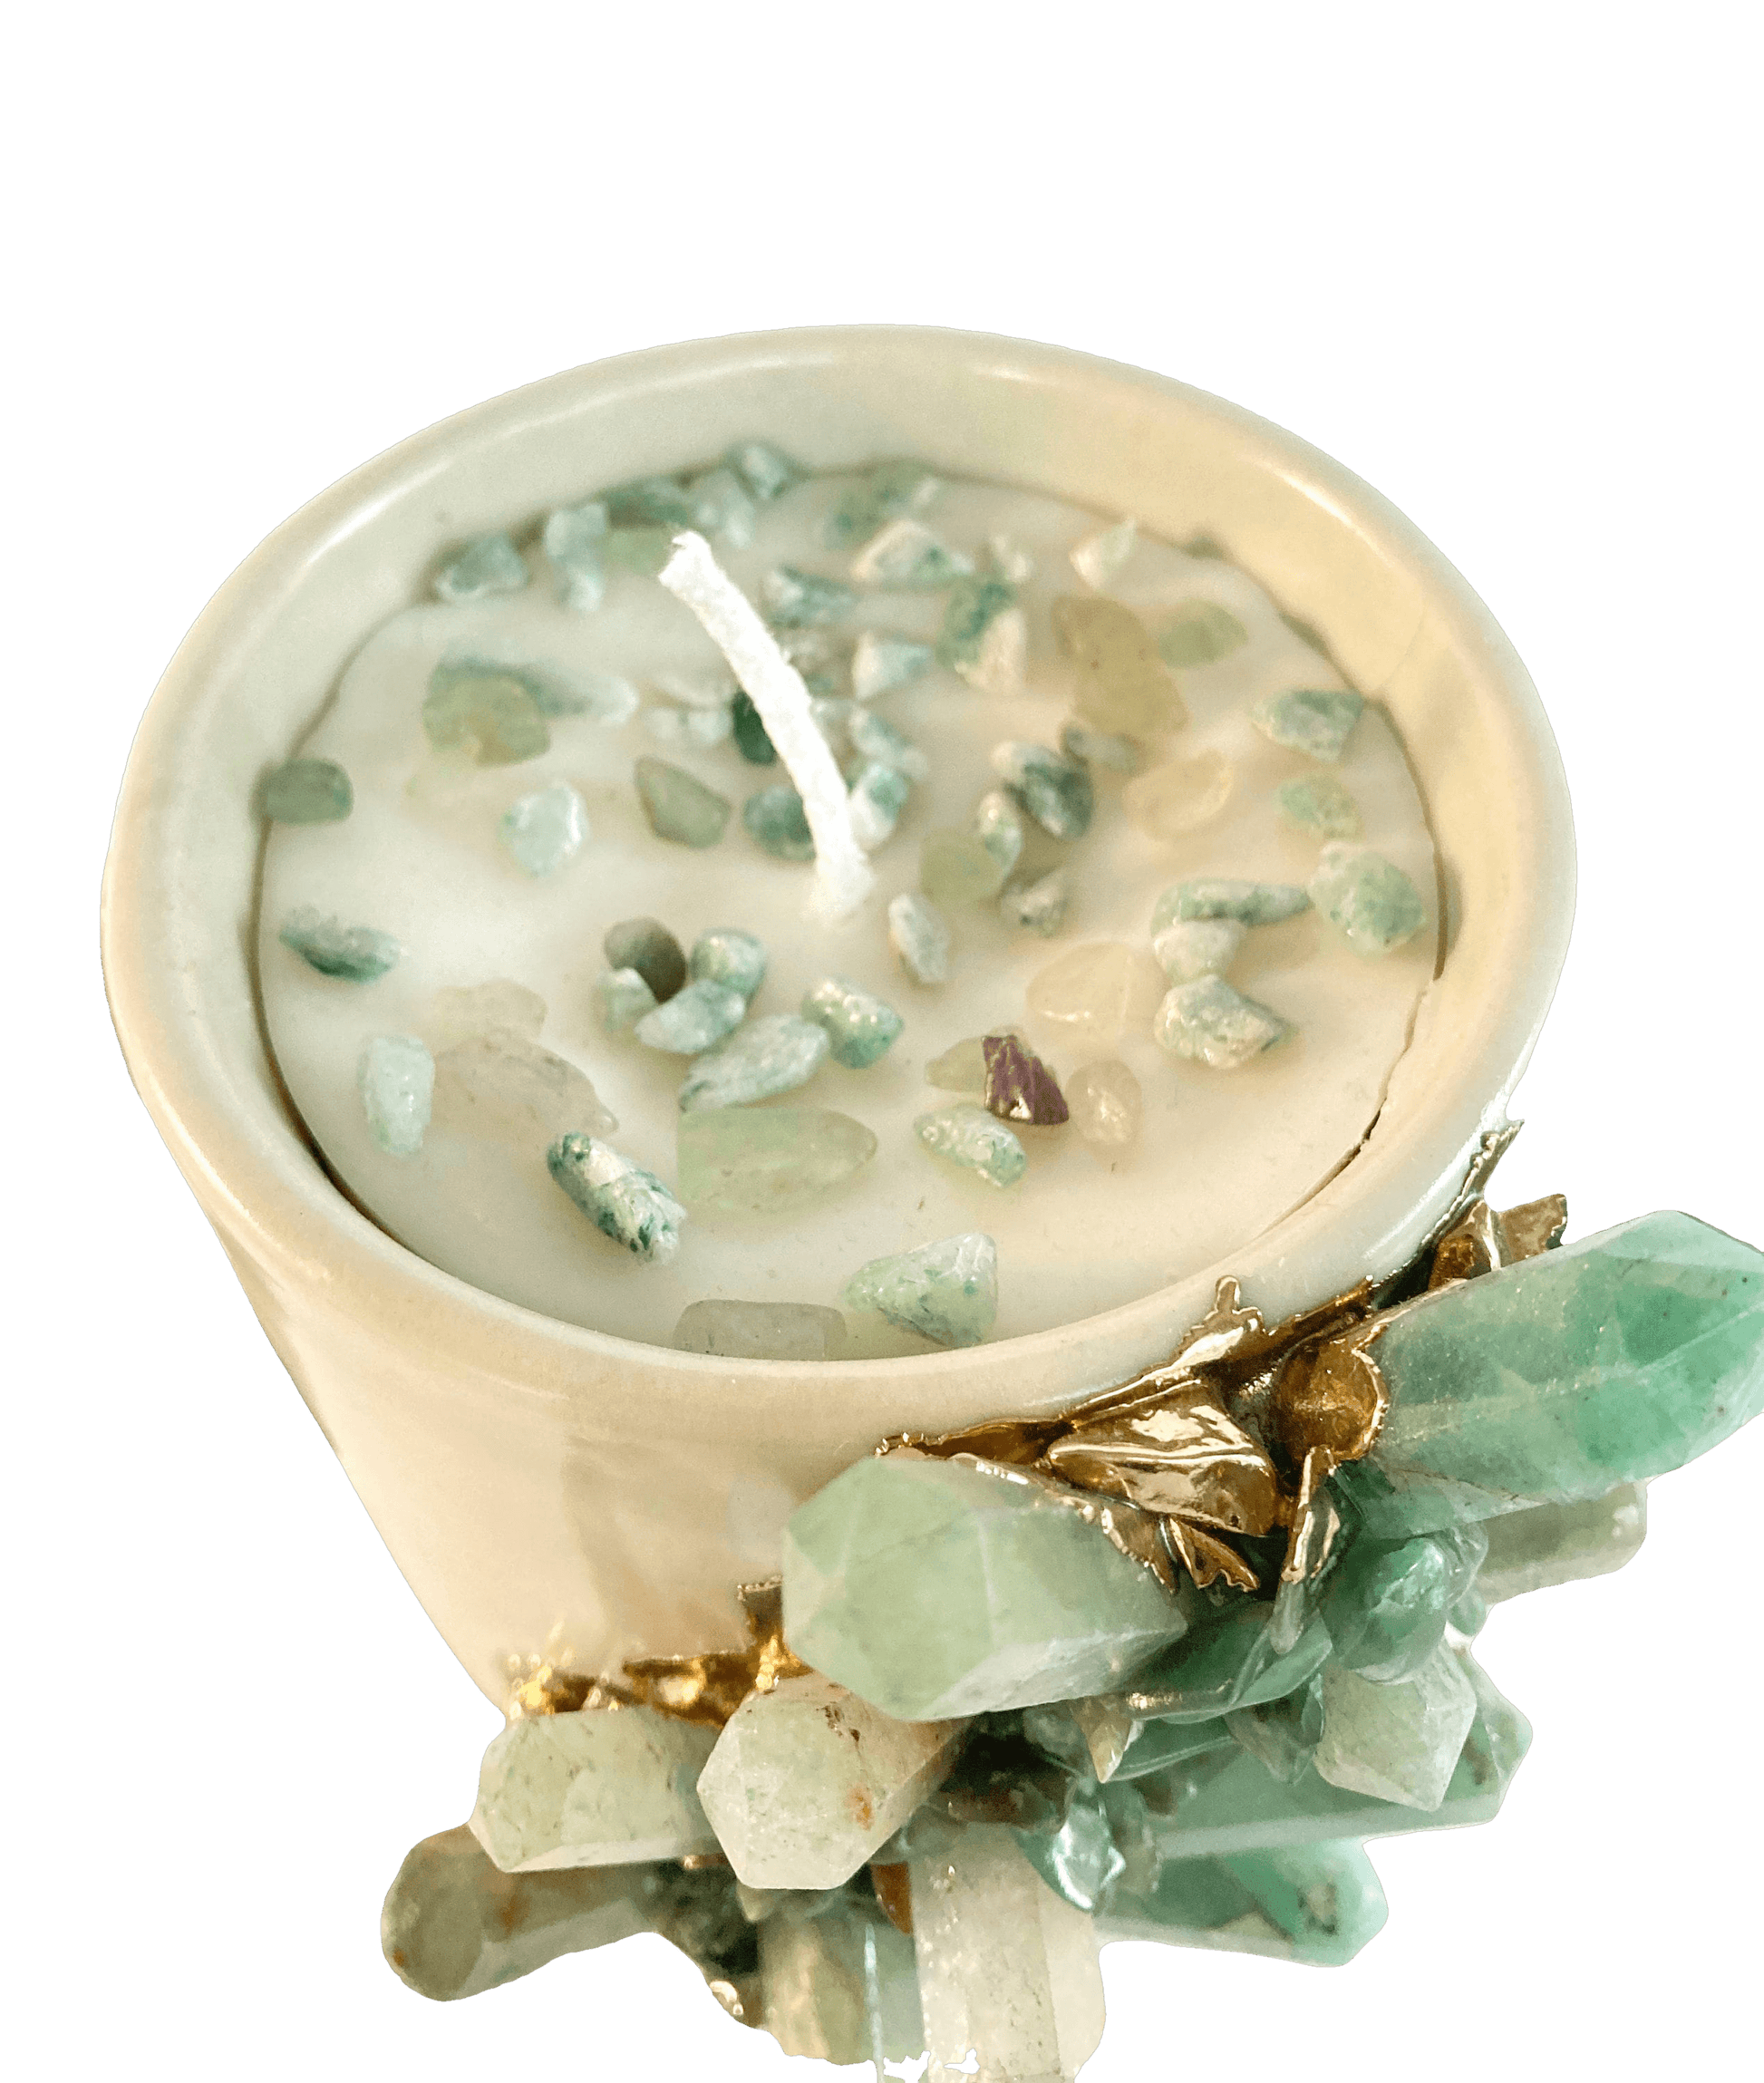 Green Quartz Crystal Scented Soy Candles in Coffee Mug - Set of 2 - MAIA HOMES